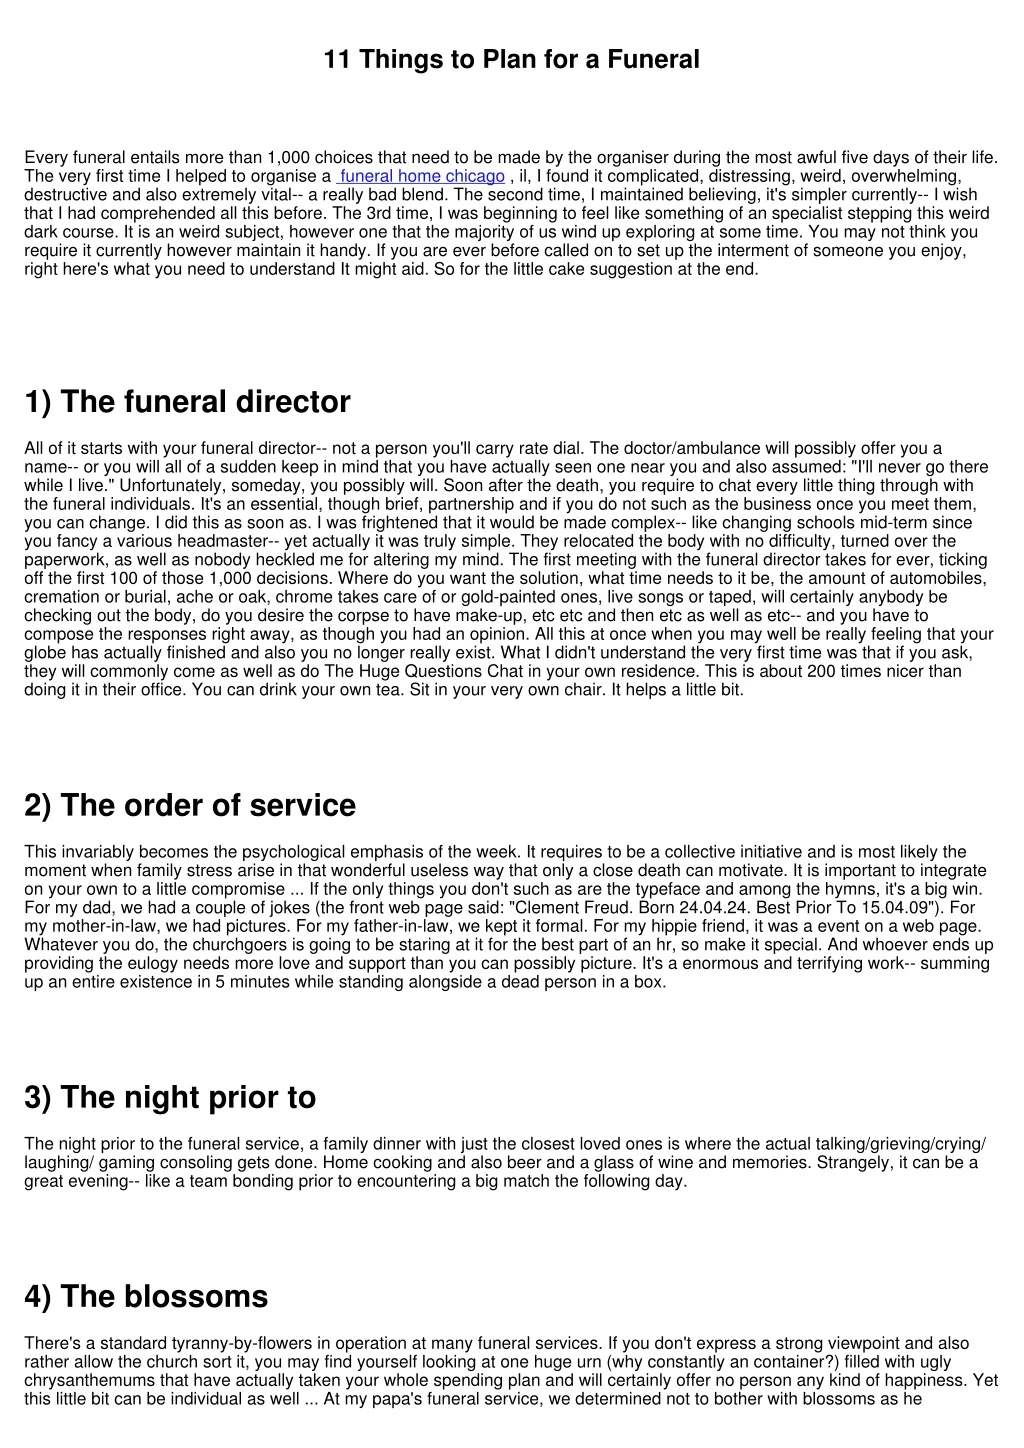 11 things to plan for a funeral